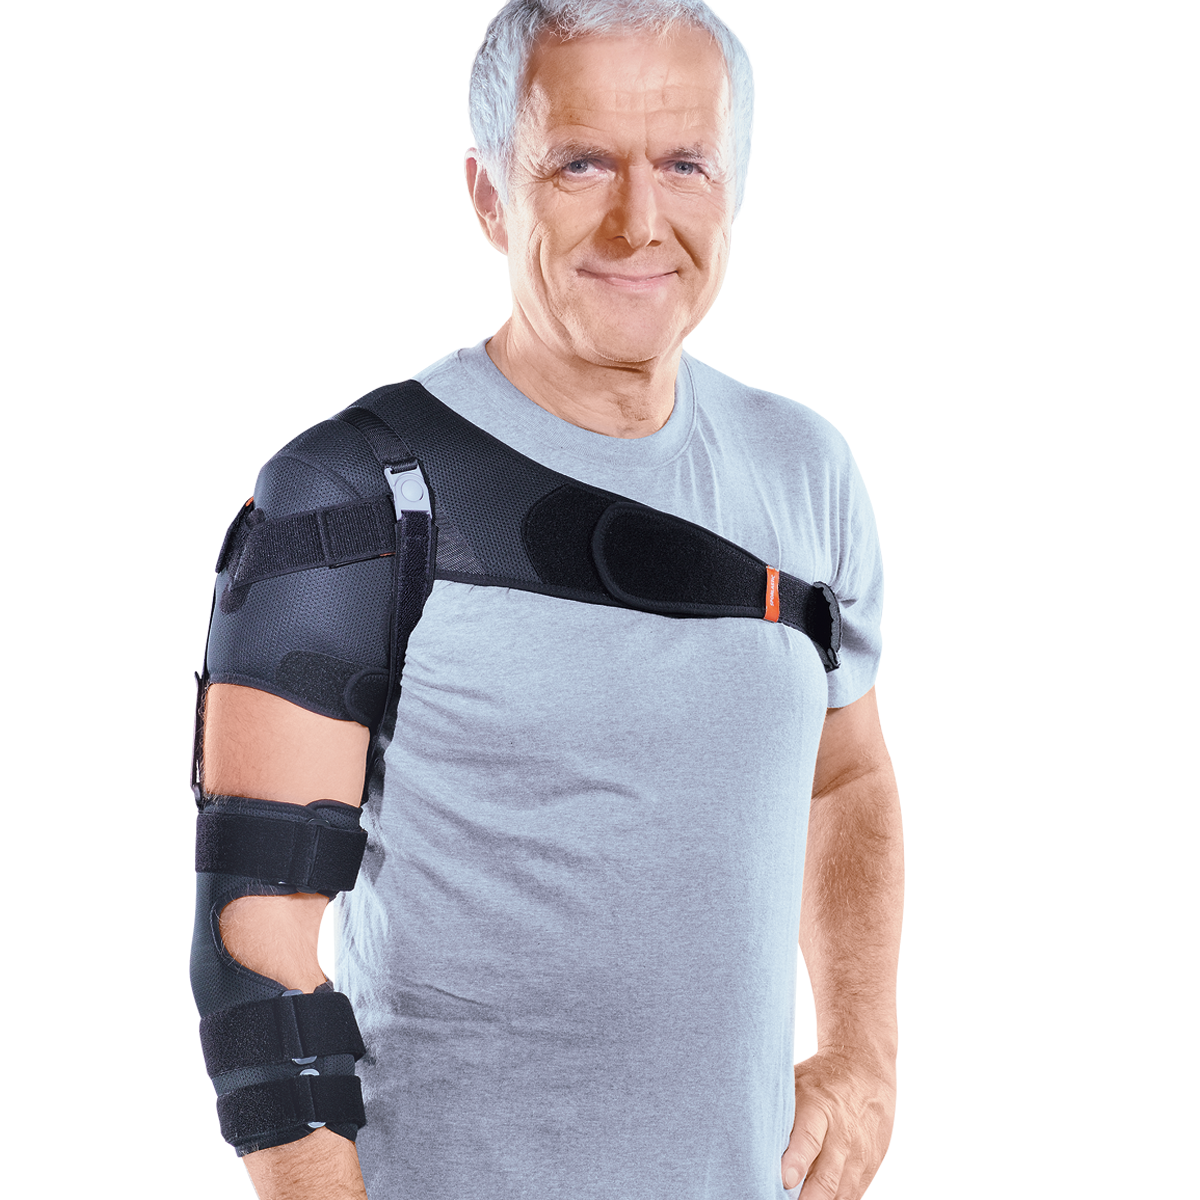 Shoulder Braces & Support – Physio supplies canada